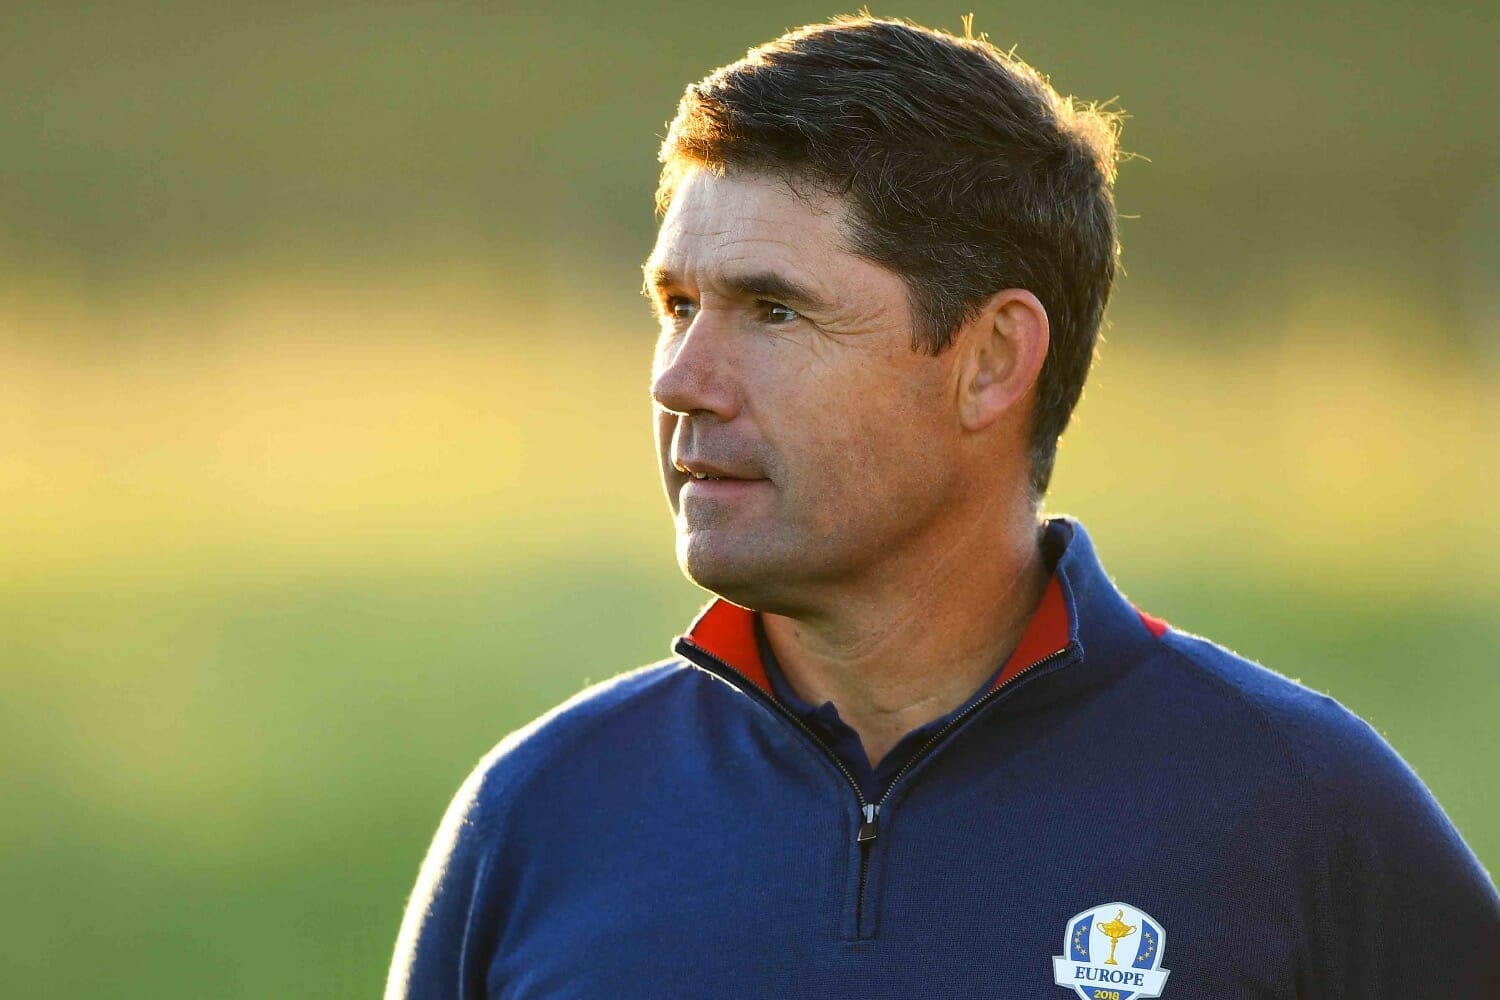 Westwood stands aside for Harrington to captain in 2020